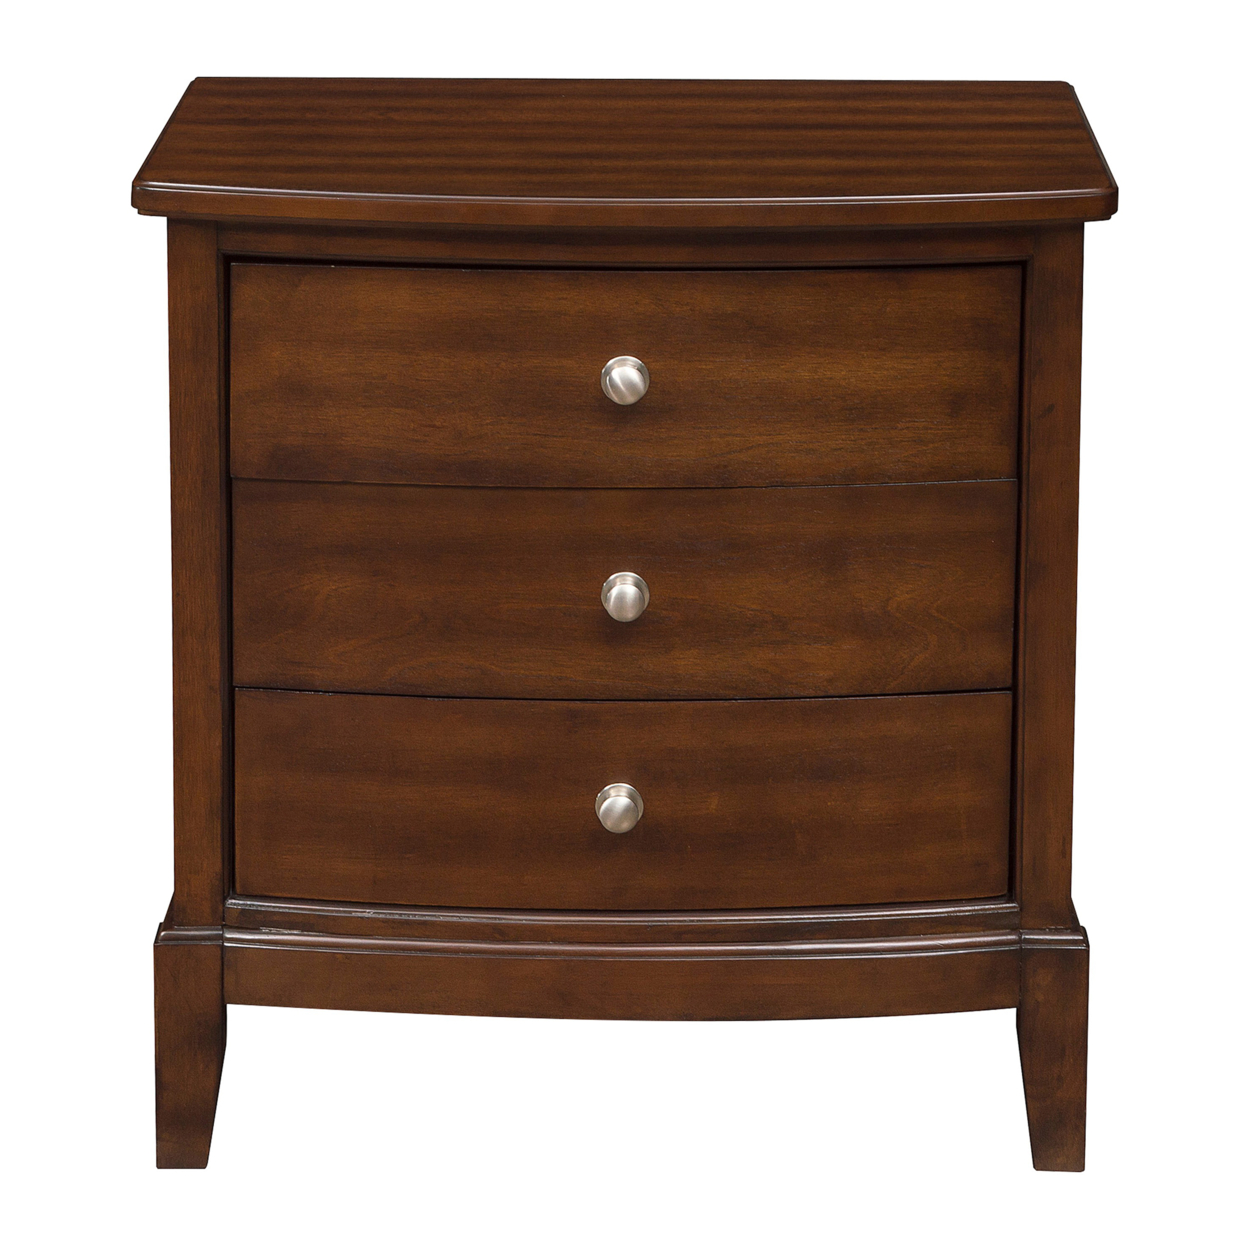 Wooden Nightstand With 3 Spacious Drawers And Knobs, Brown- Saltoro Sherpi